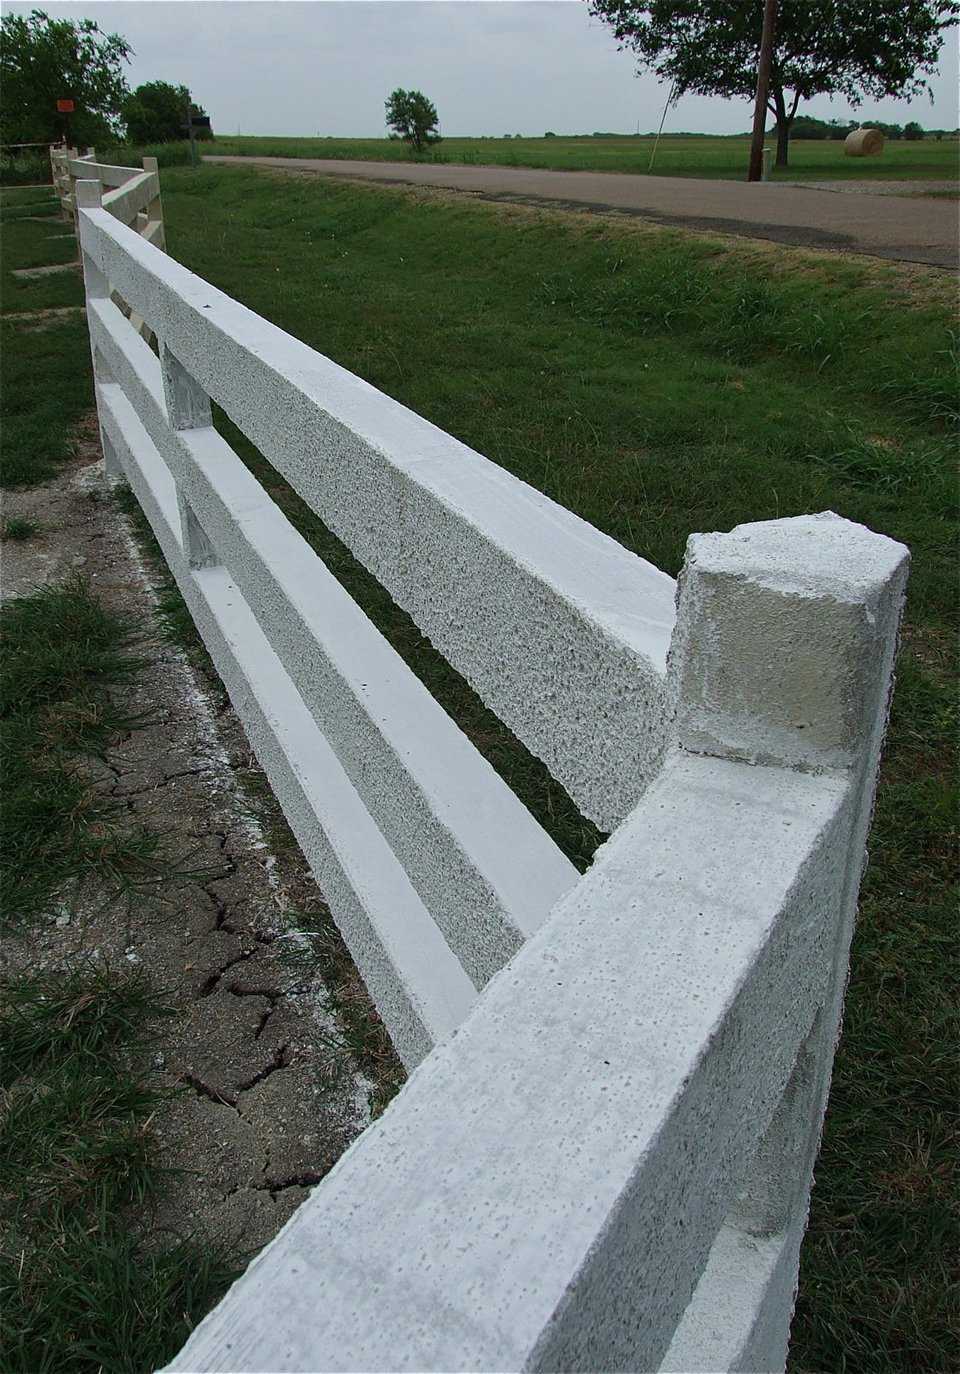 A five-sided corner post allows the fence to pivot and navigate around property lines to completely encompass the property.